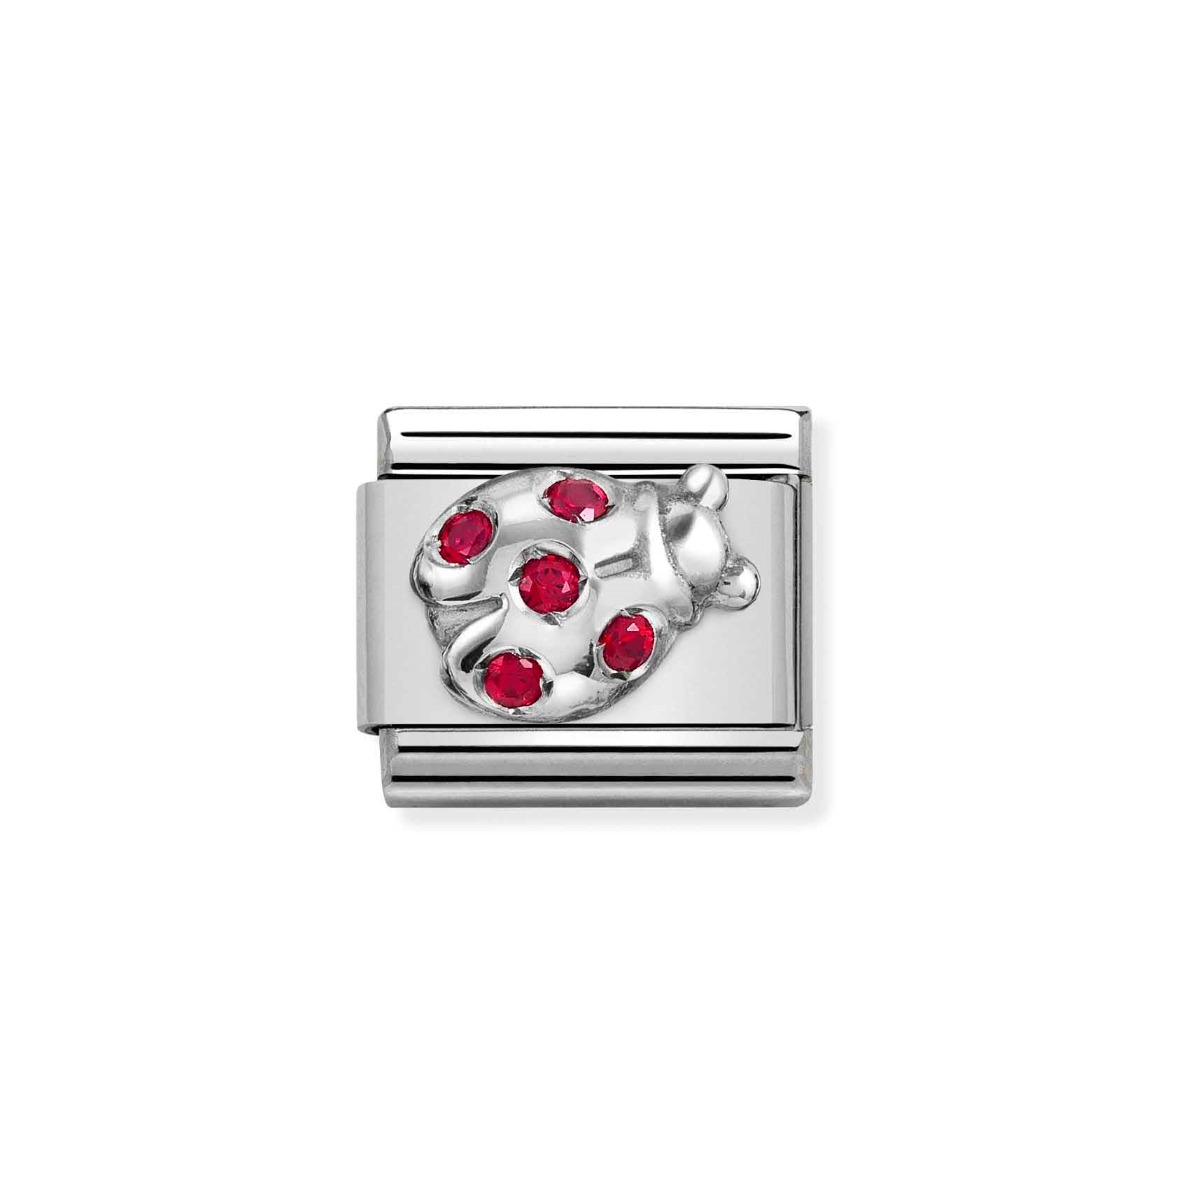 Nomination Silver and Red Zirconia Ladybug Charm 330304_36